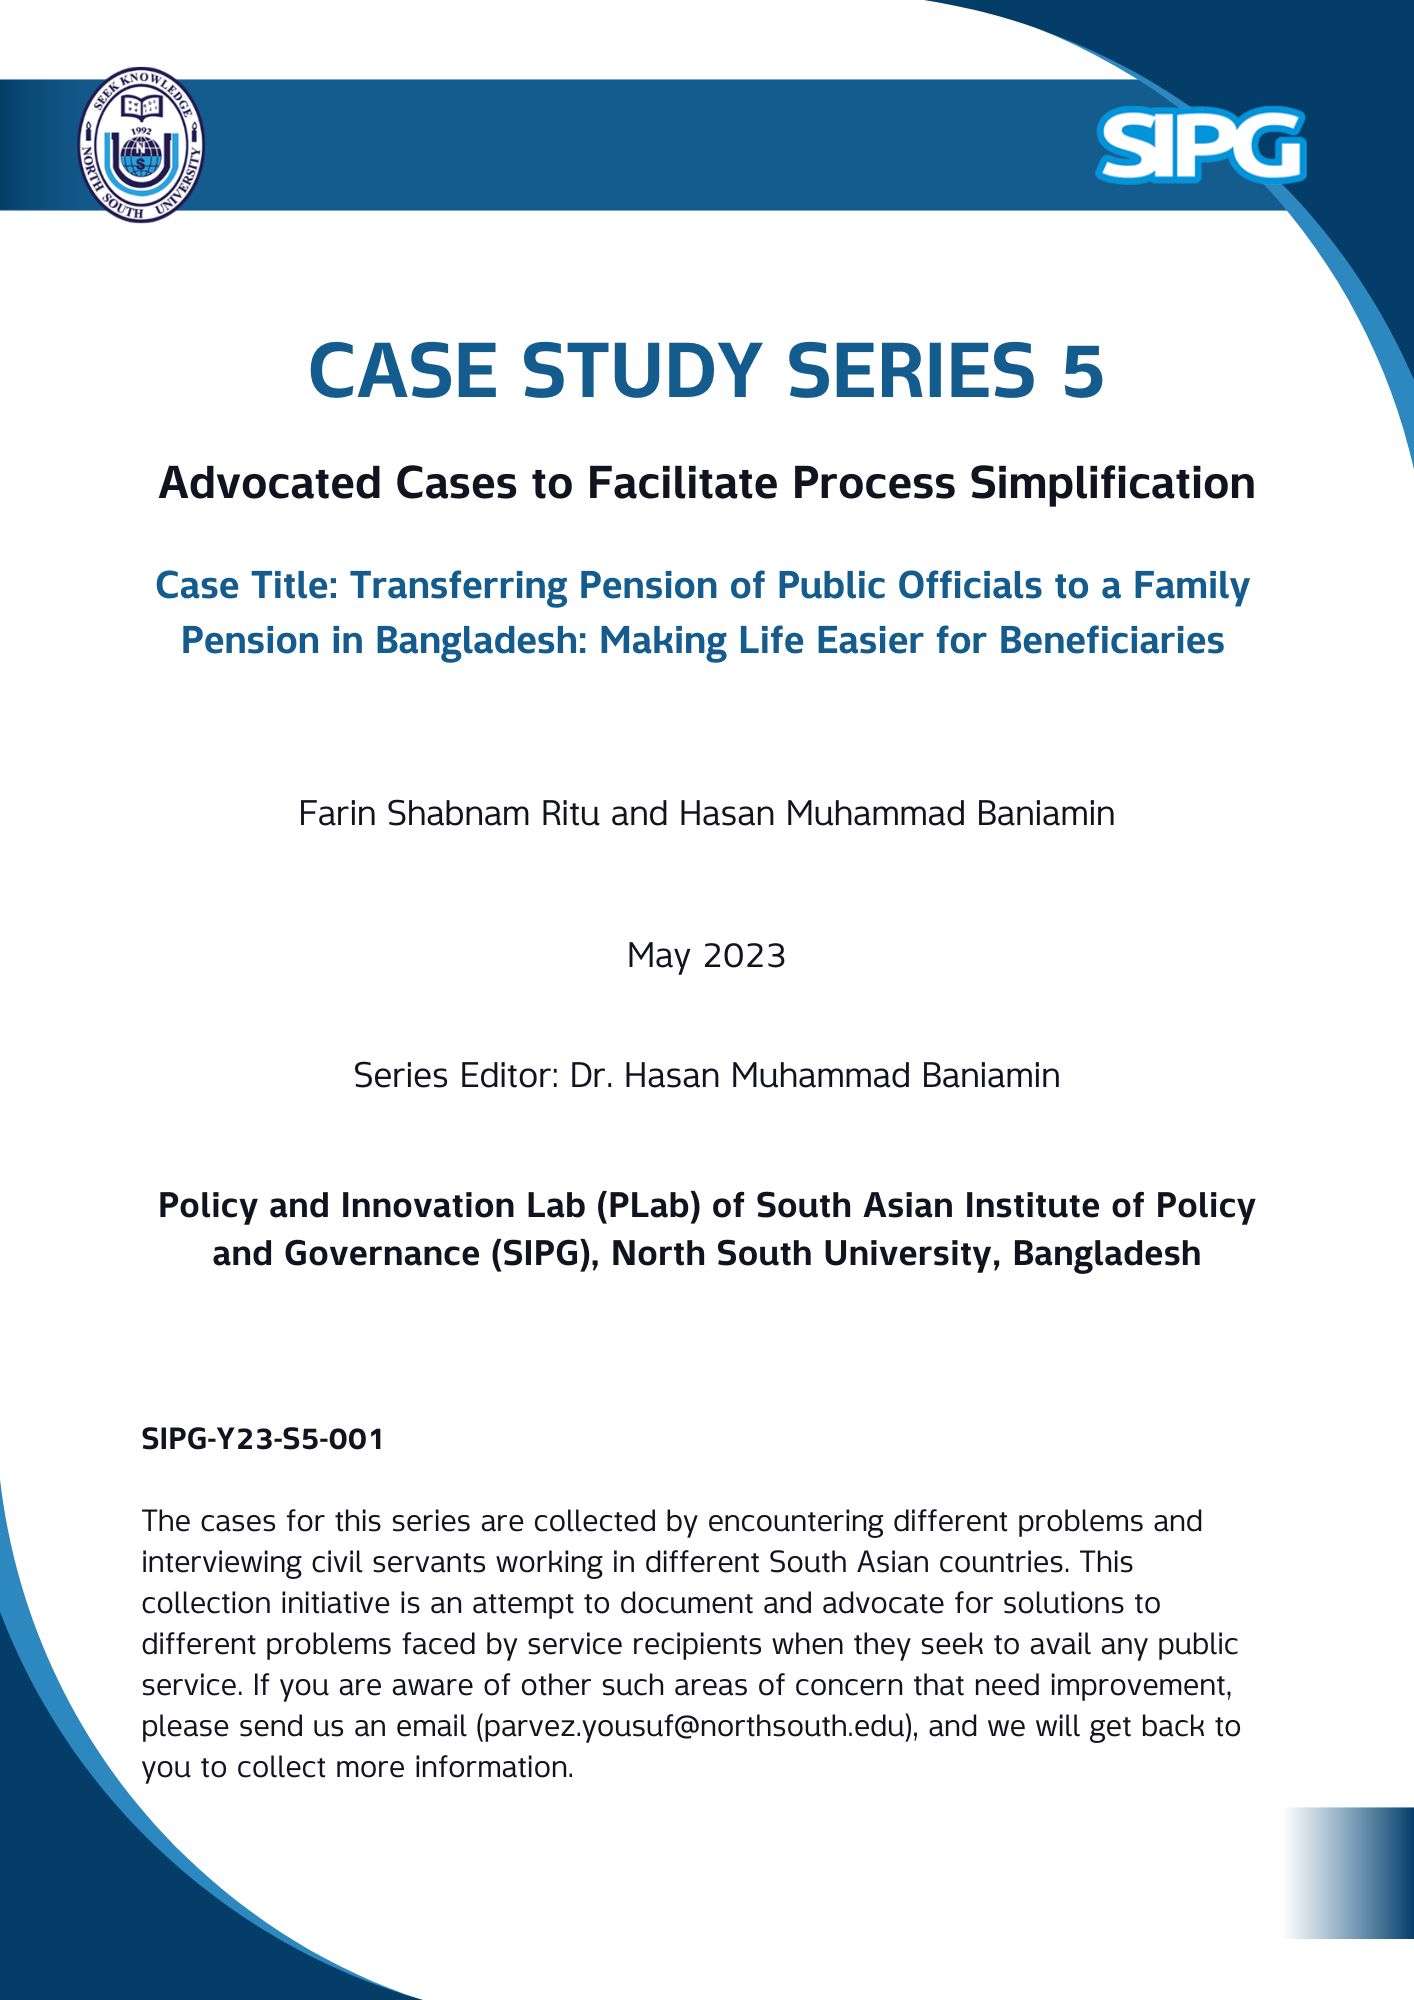 SIPG Case Study Series 4: Anticipating Problem and Proactiveness